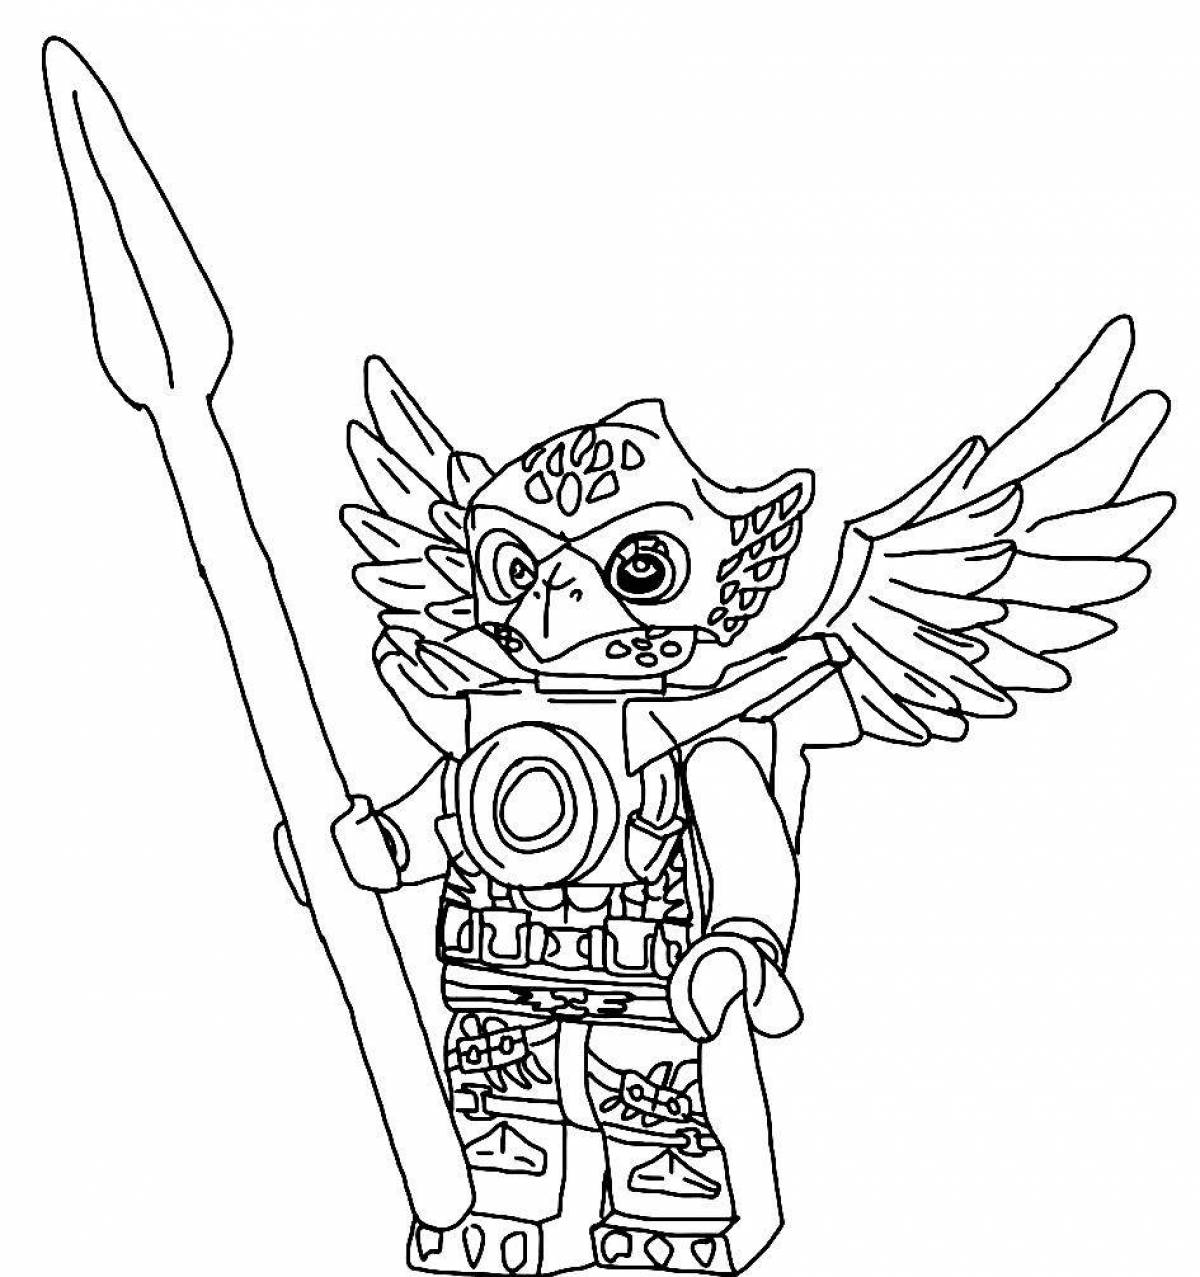 Outstanding lego chima coloring page